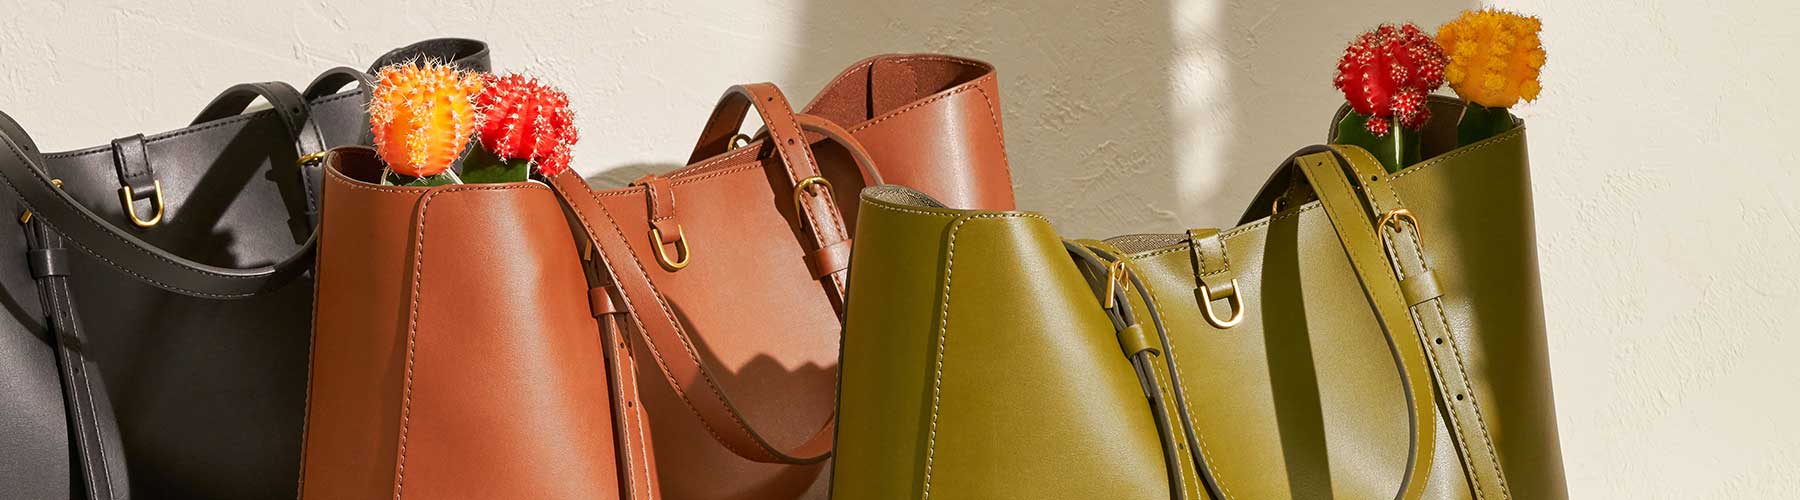 Fossil Cactus Leather Totes Latest Vegan Bags to Hit the Market